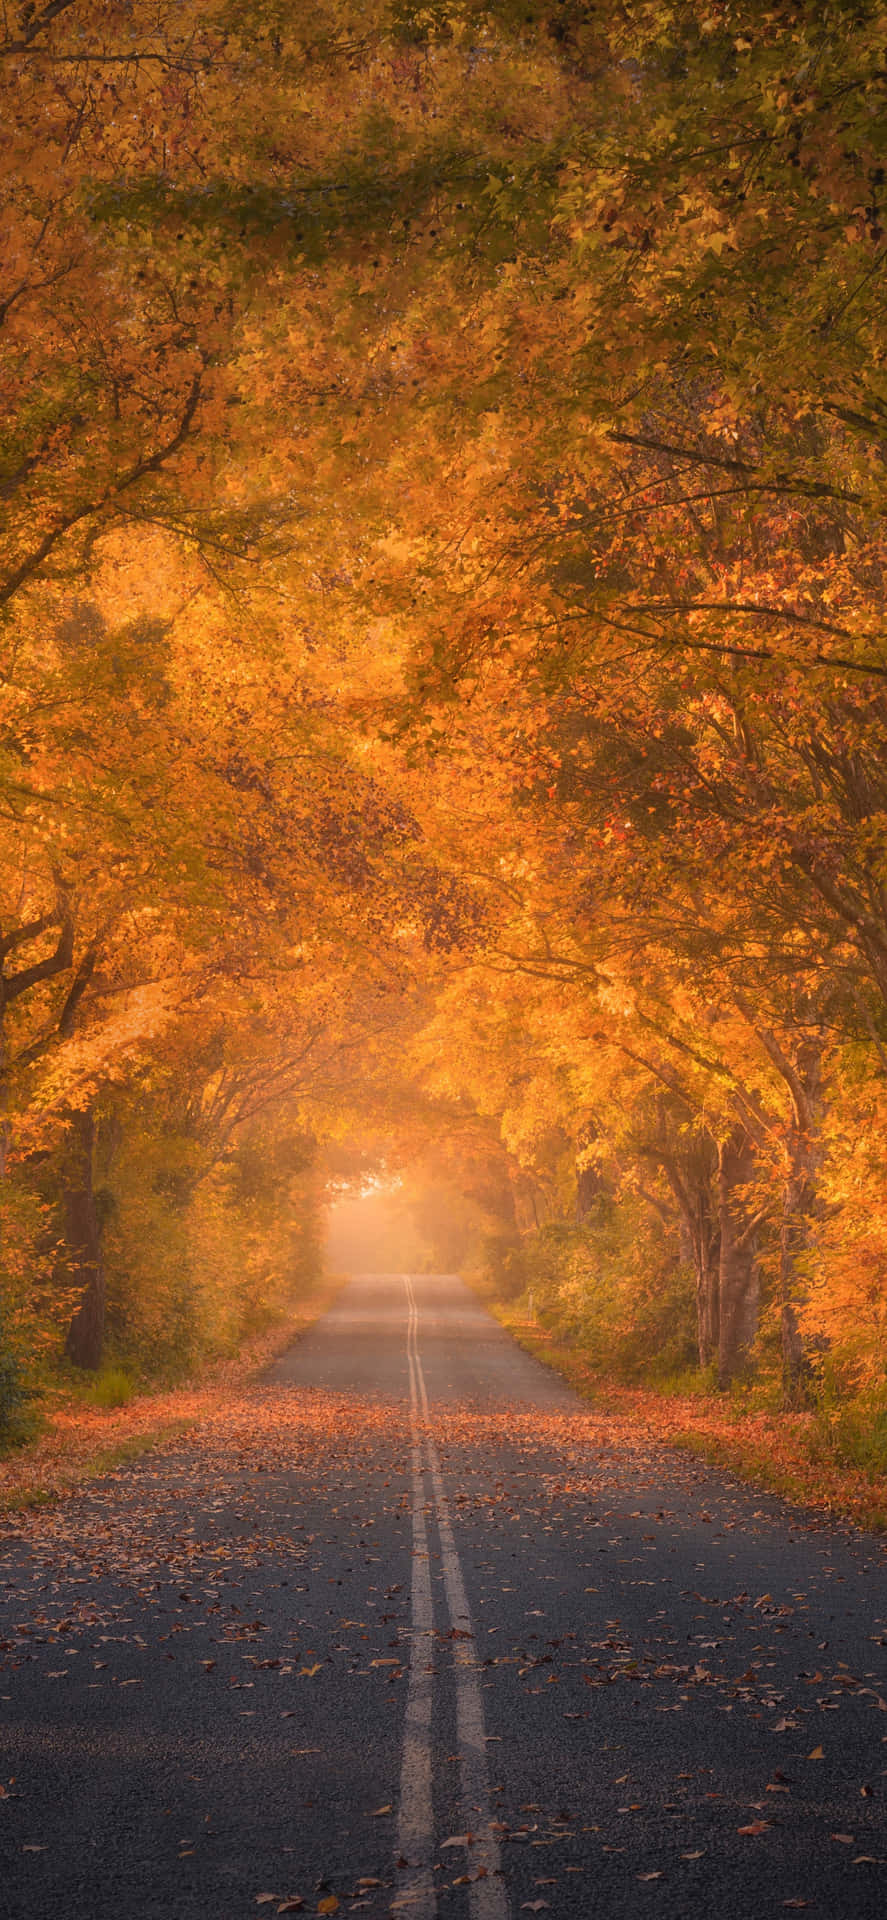 Appreciate Nature's Fall Foliage with an Iphone 6 Plus Wallpaper